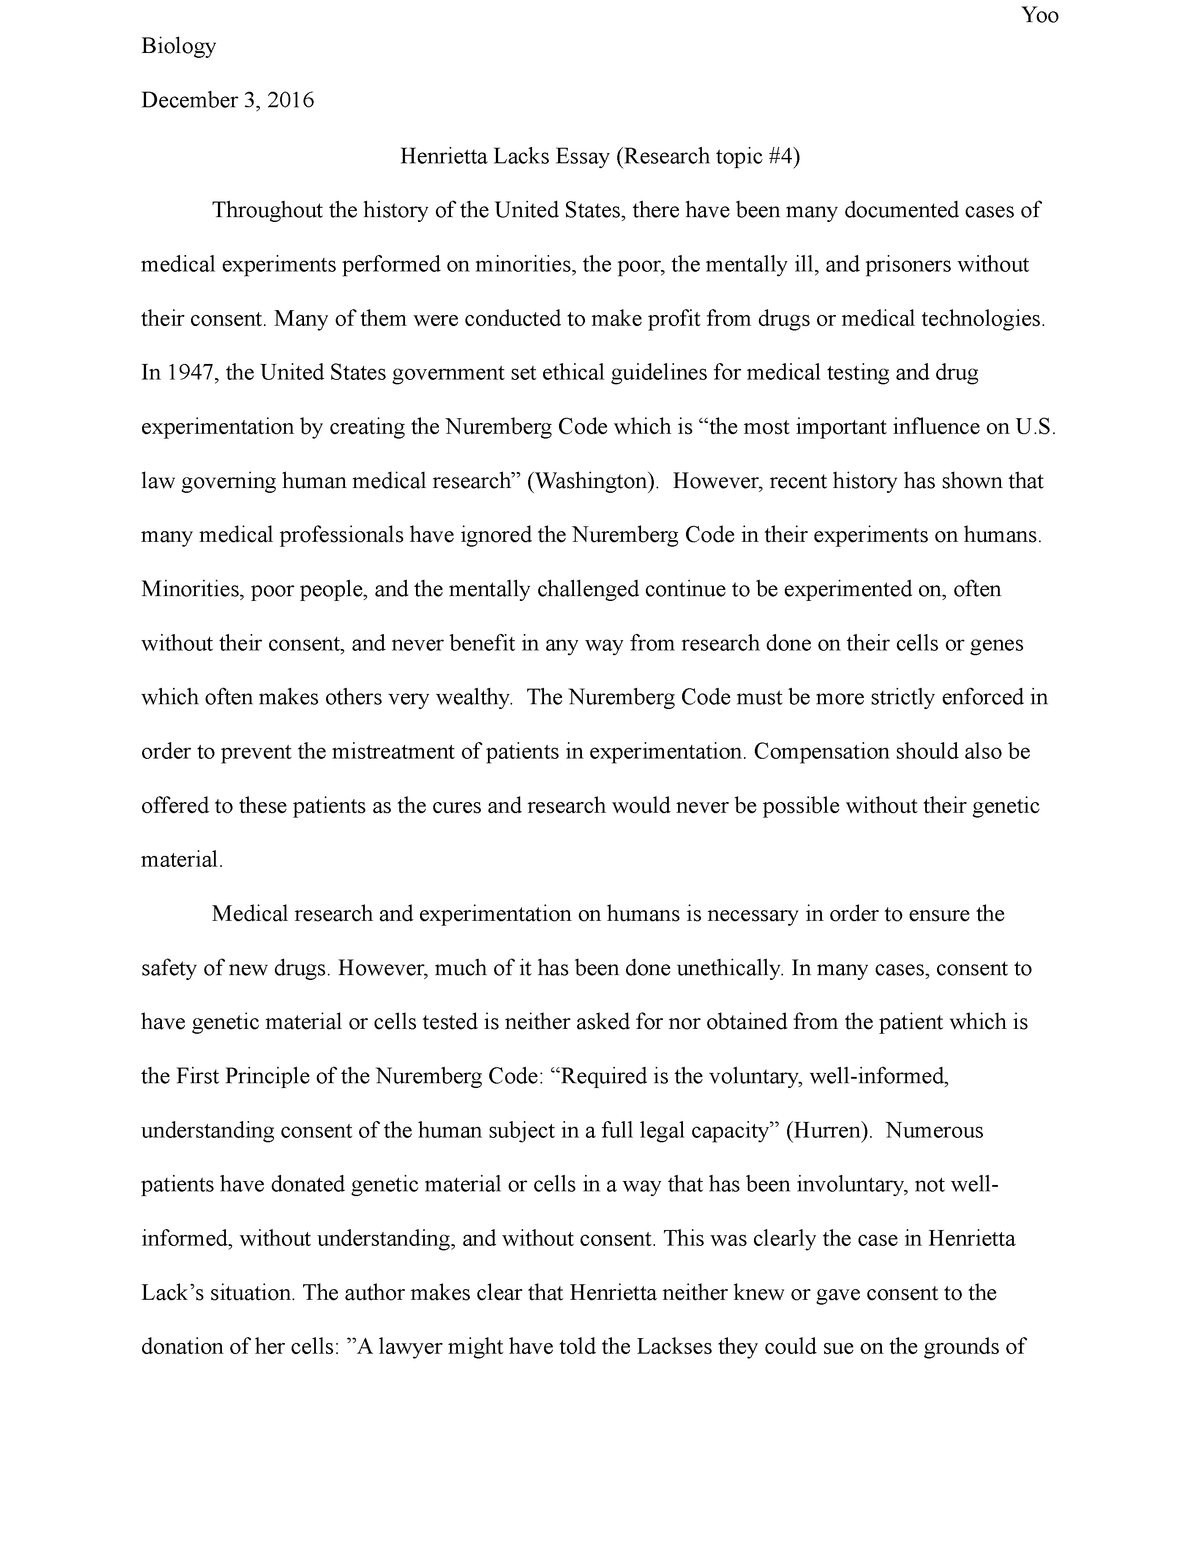 the immortal life of henrietta lacks ethical issues essay